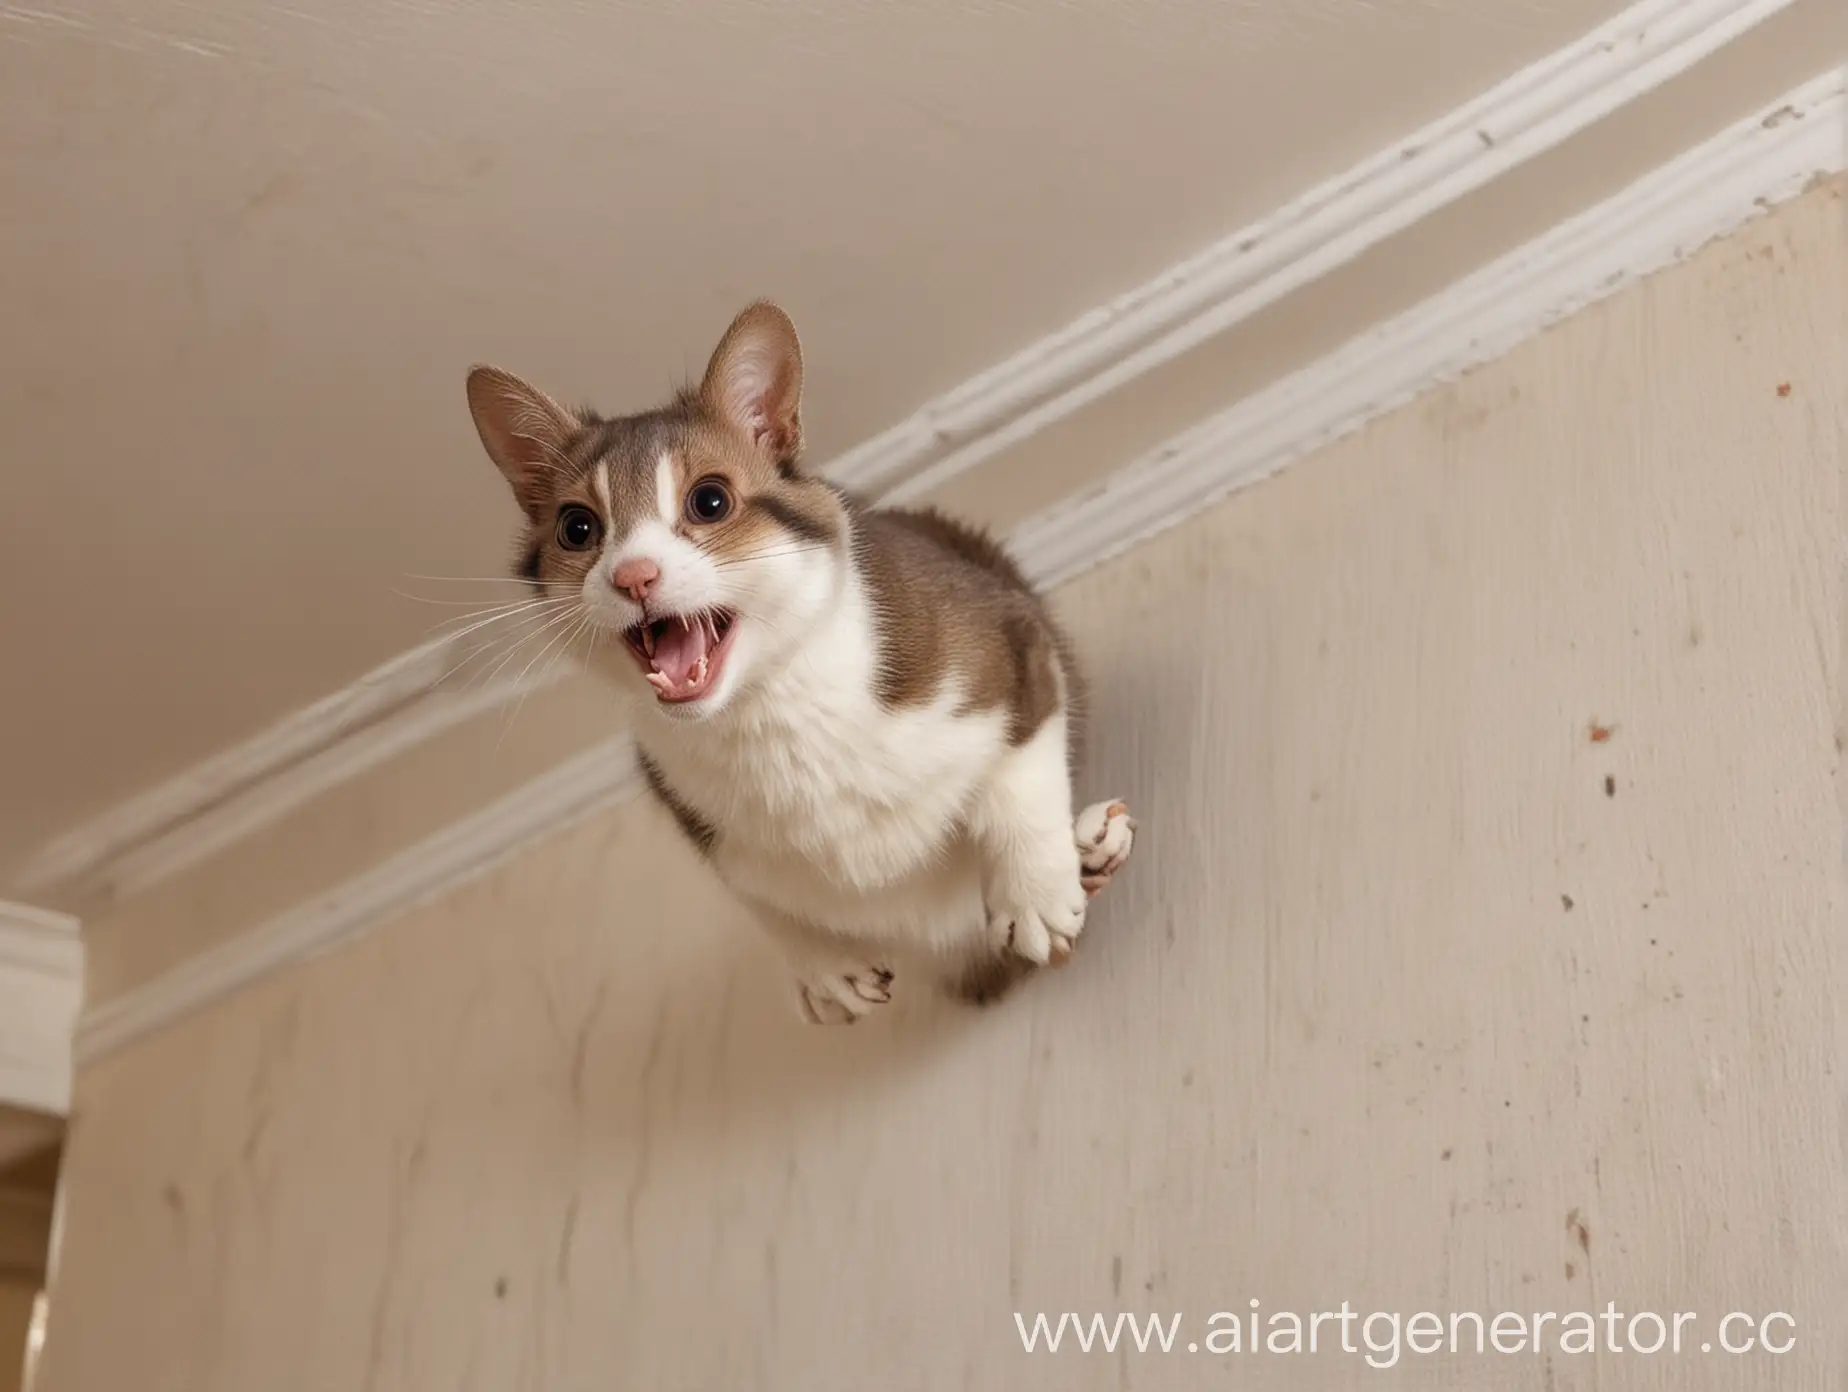 Adventurous-SquirrelGlider-with-CatLike-Features-Leaping-Across-Indoor-Spaces